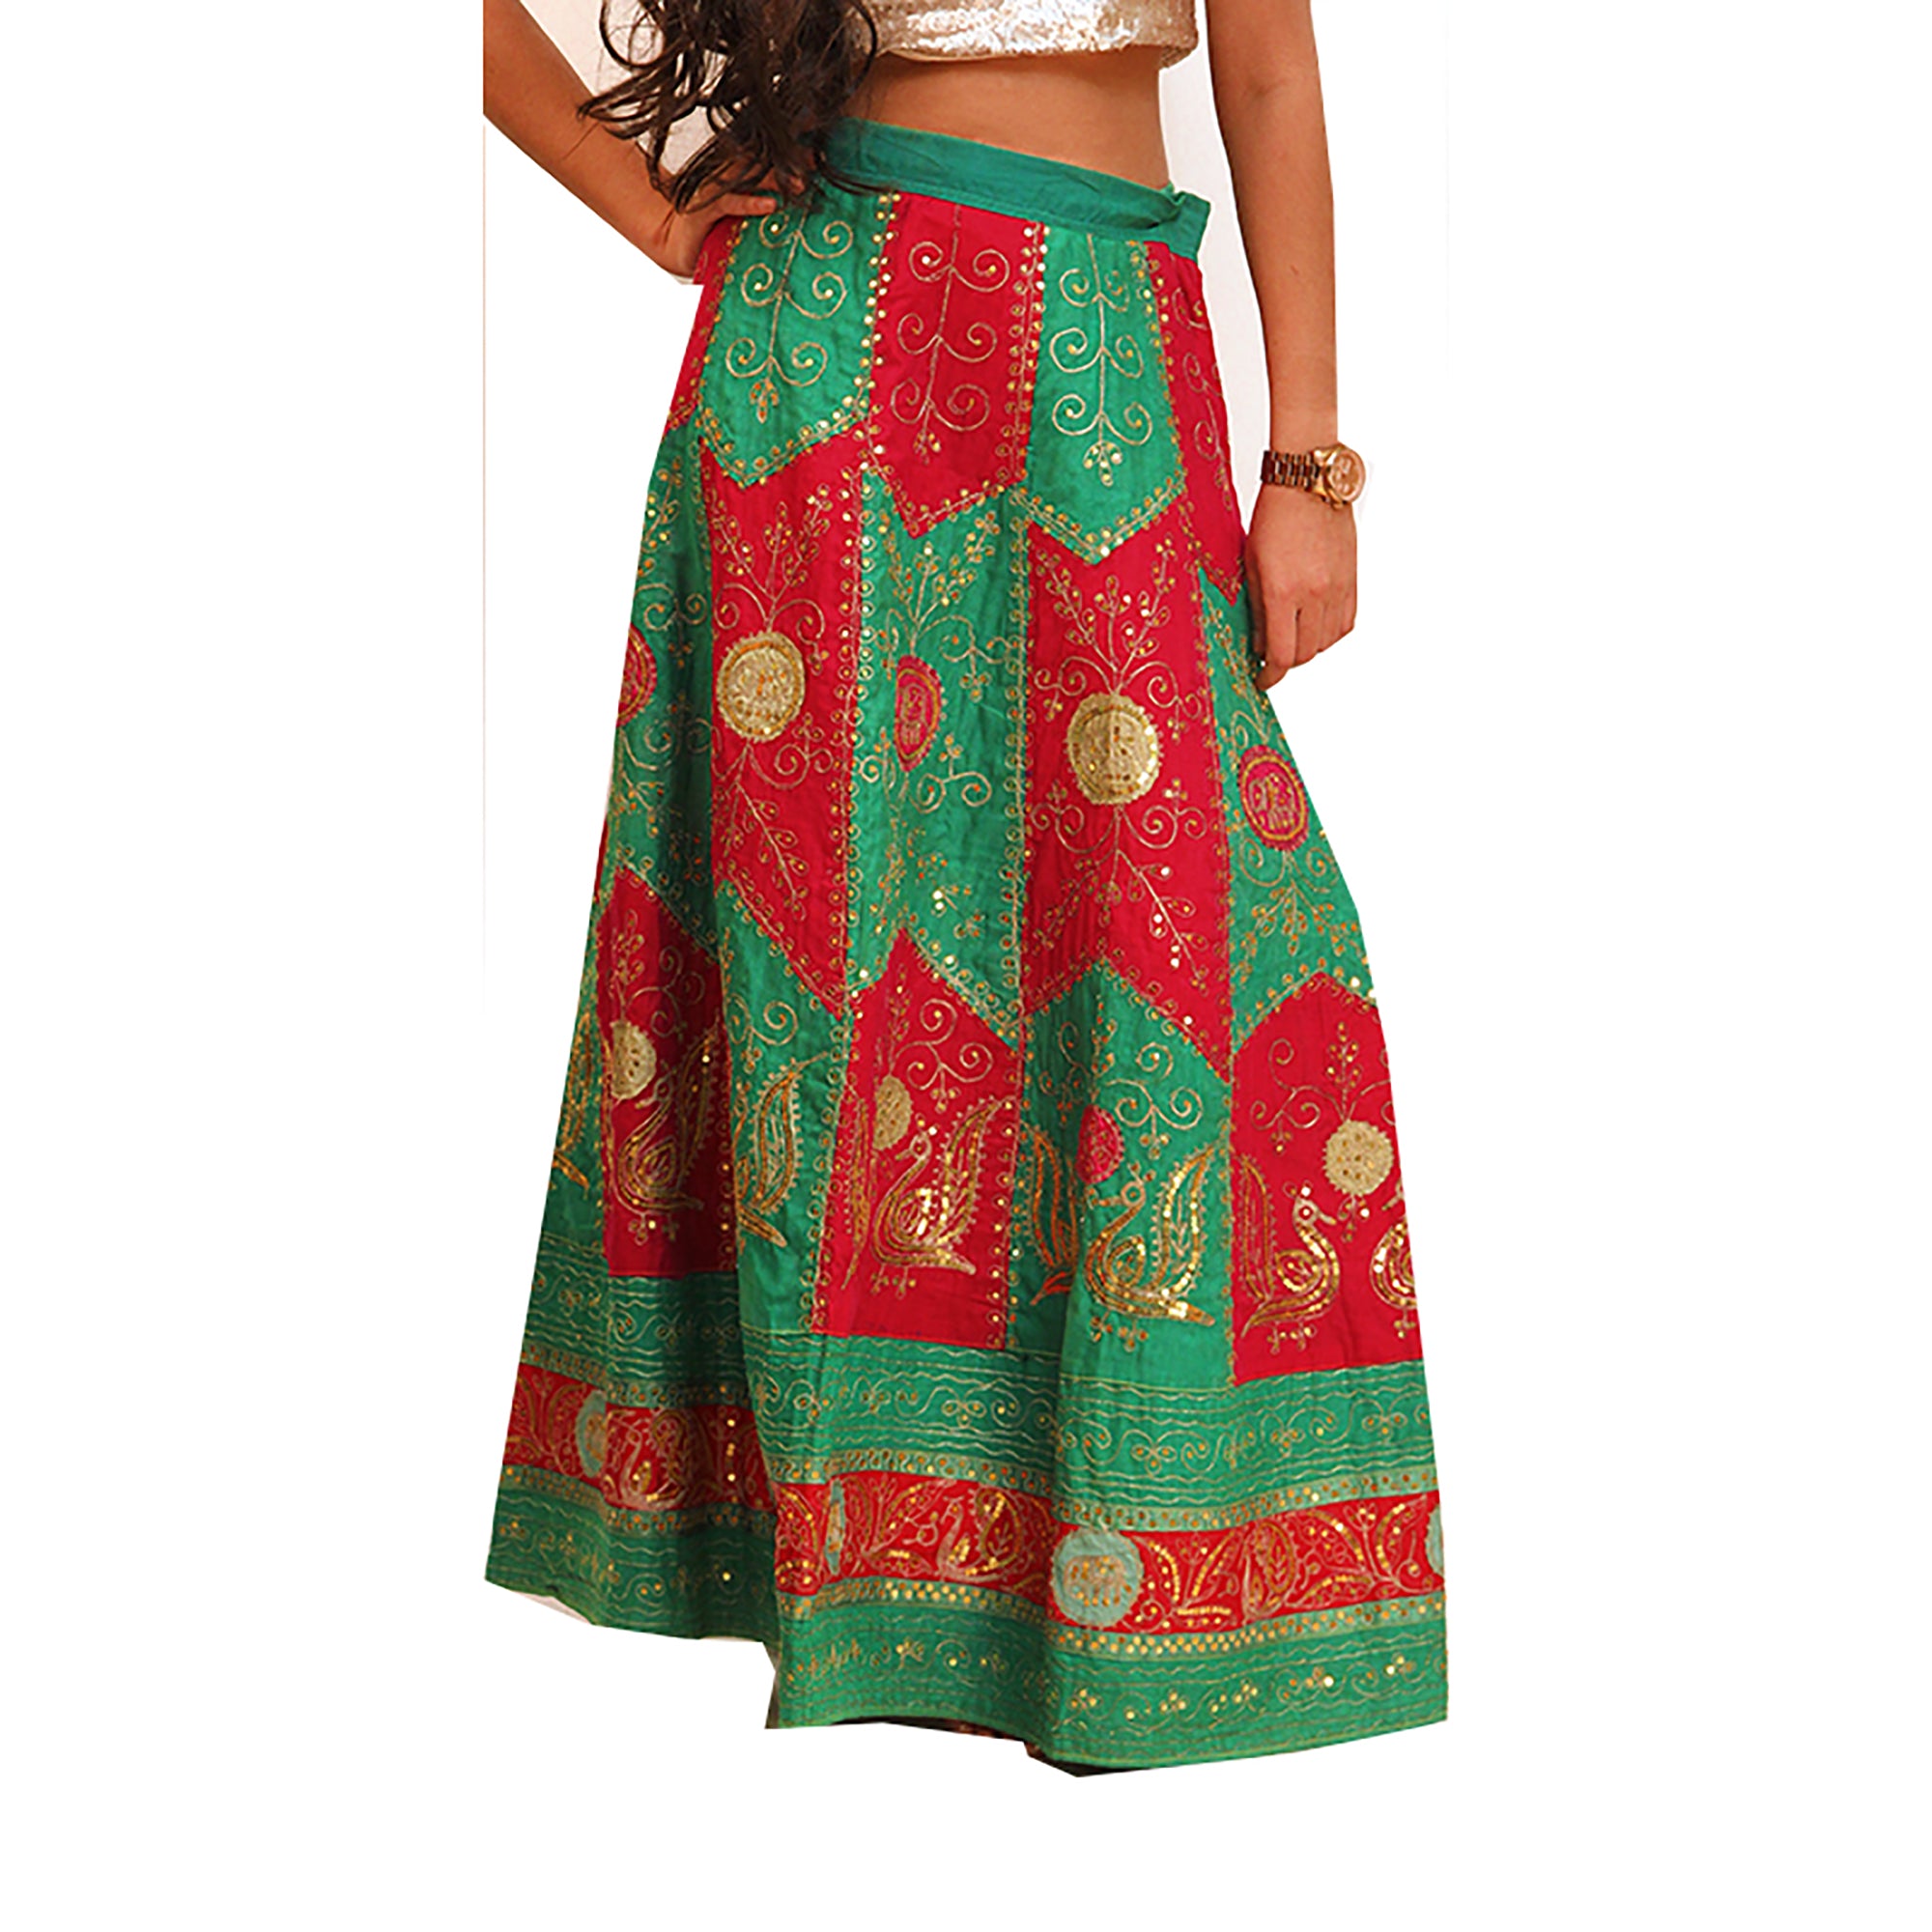 Red and green skirt with gold embroidery - Vintage India NYC